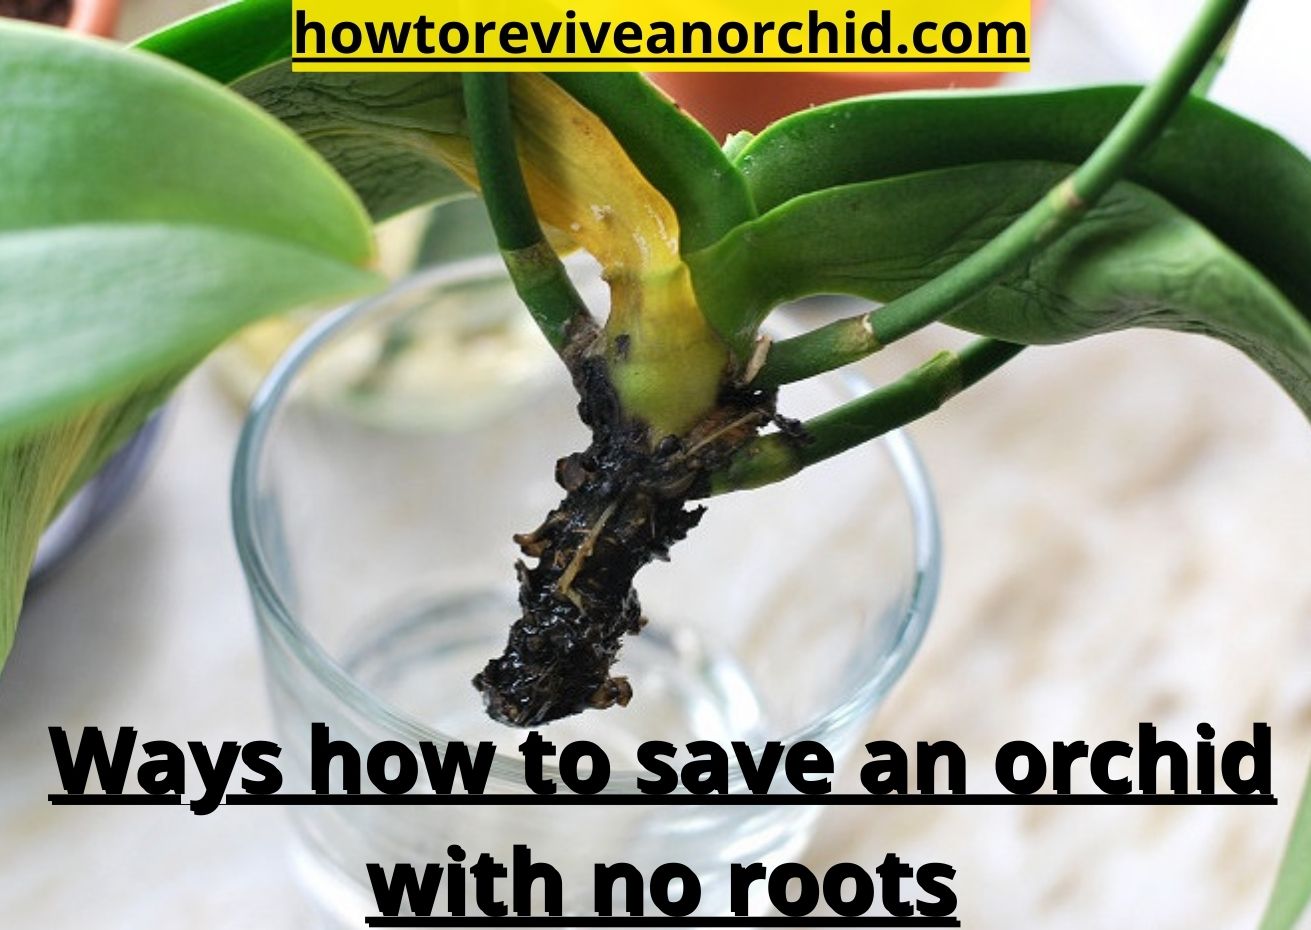 How to save an orchid with no roots: 9 basic steps